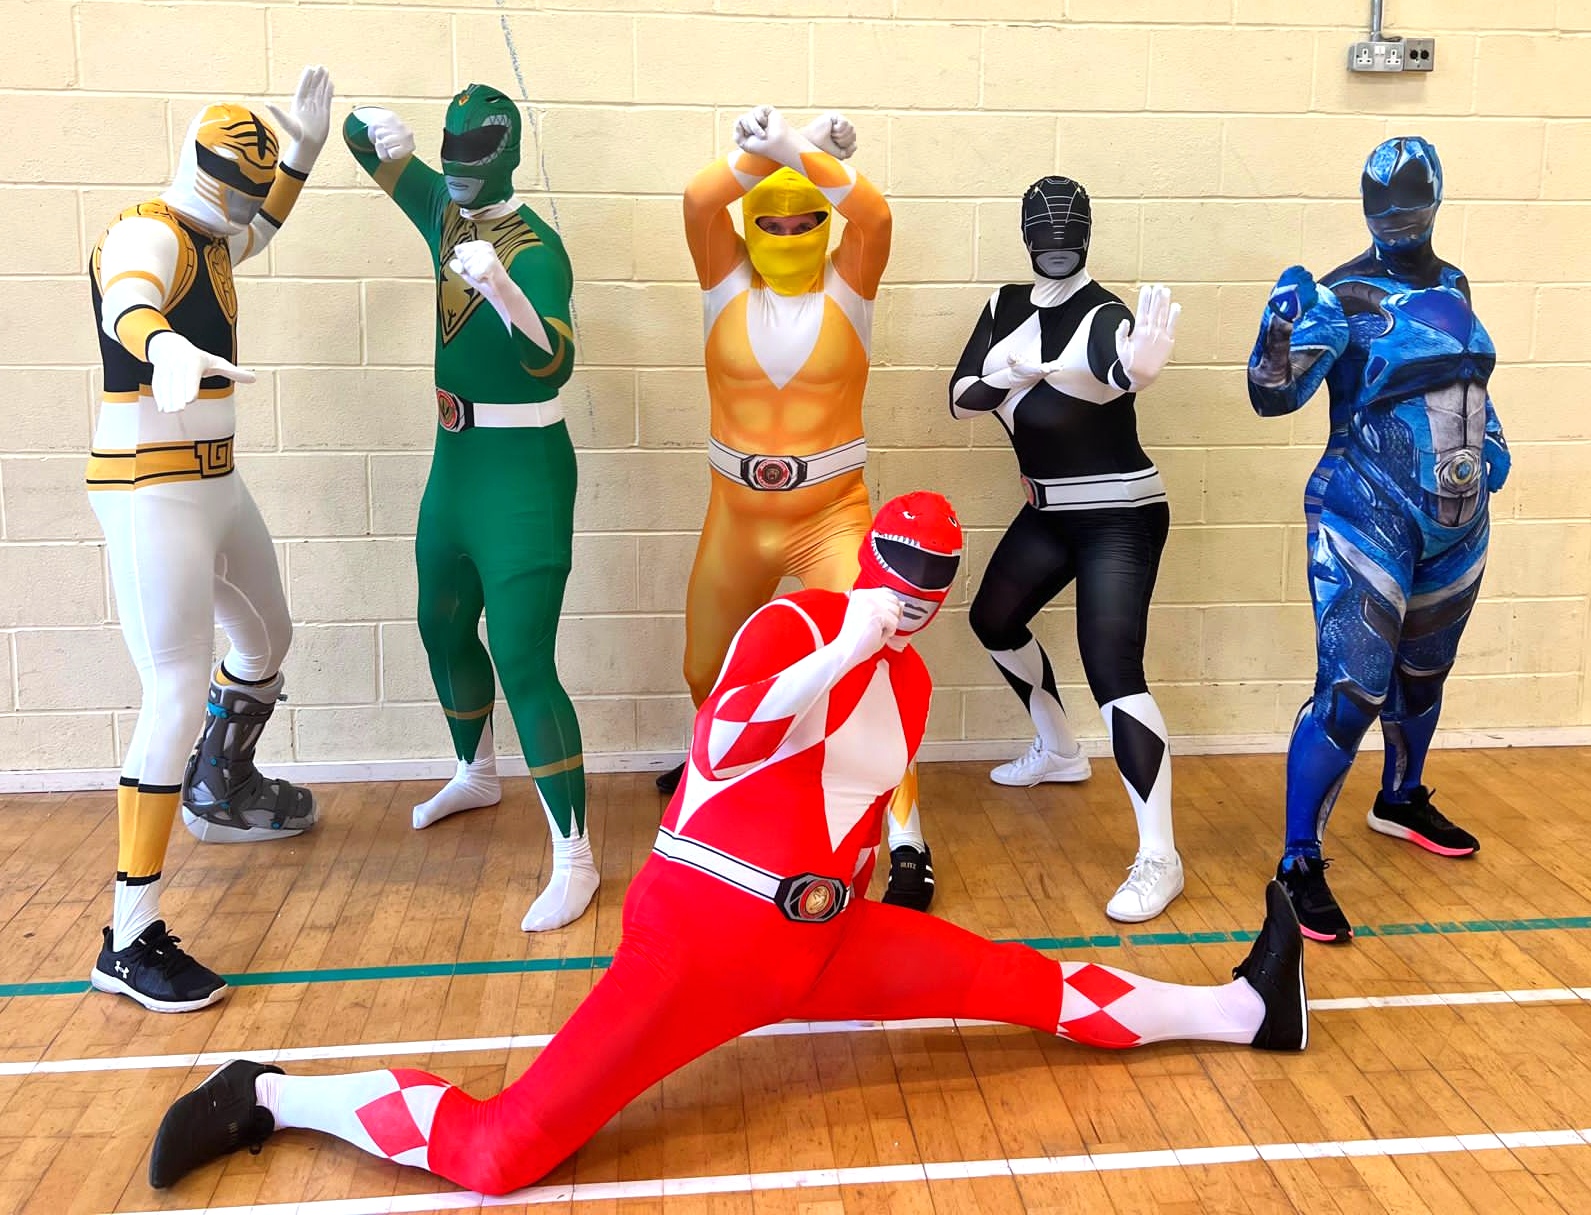 Swindon's Phoenix Martial Arts unite for 100 rounds of sparring dressed as the power rangers